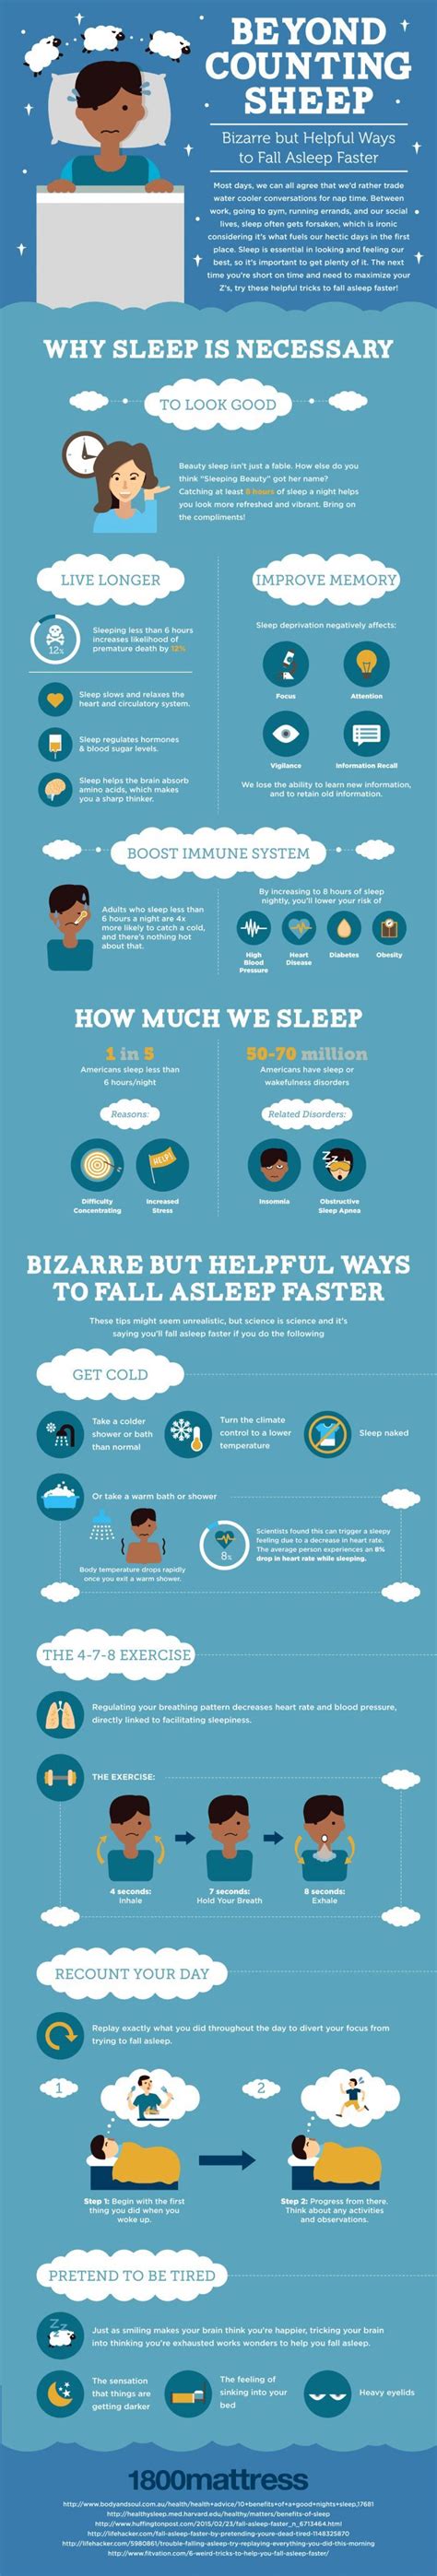 Four Bedtime Tricks To Help You Fall Asleep Faster Infographic How